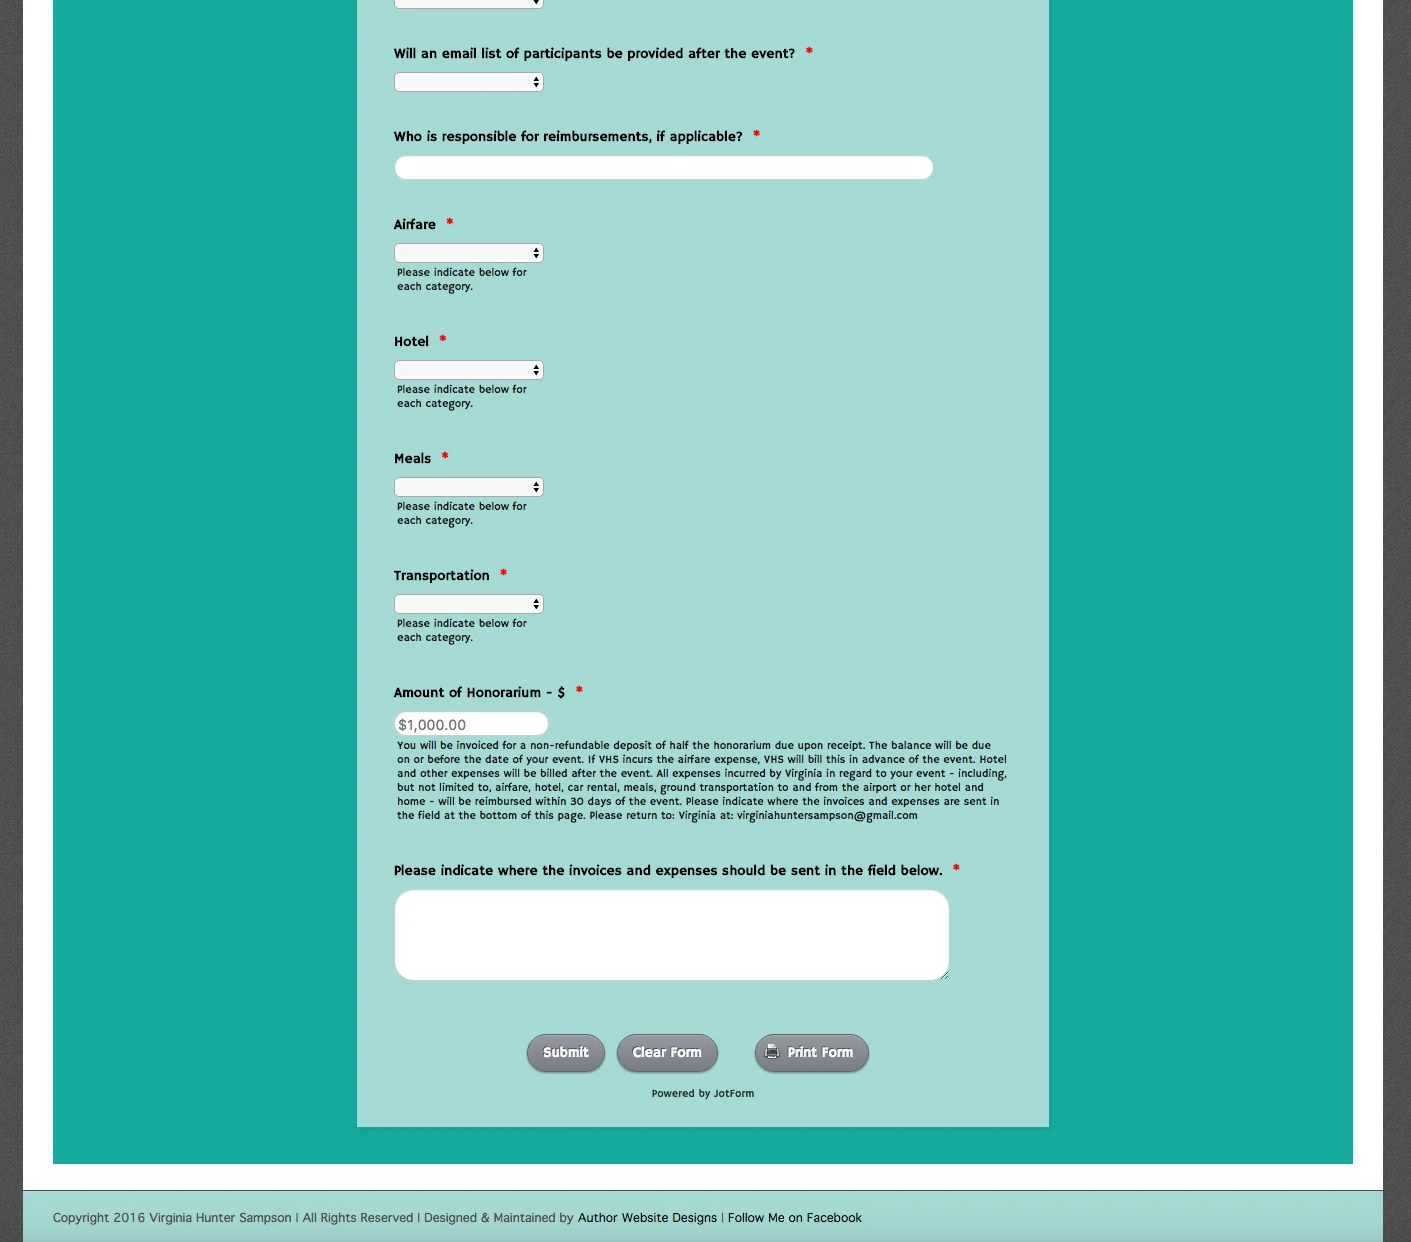 Form takes over entire page in Wordpress Image 1 Screenshot 20